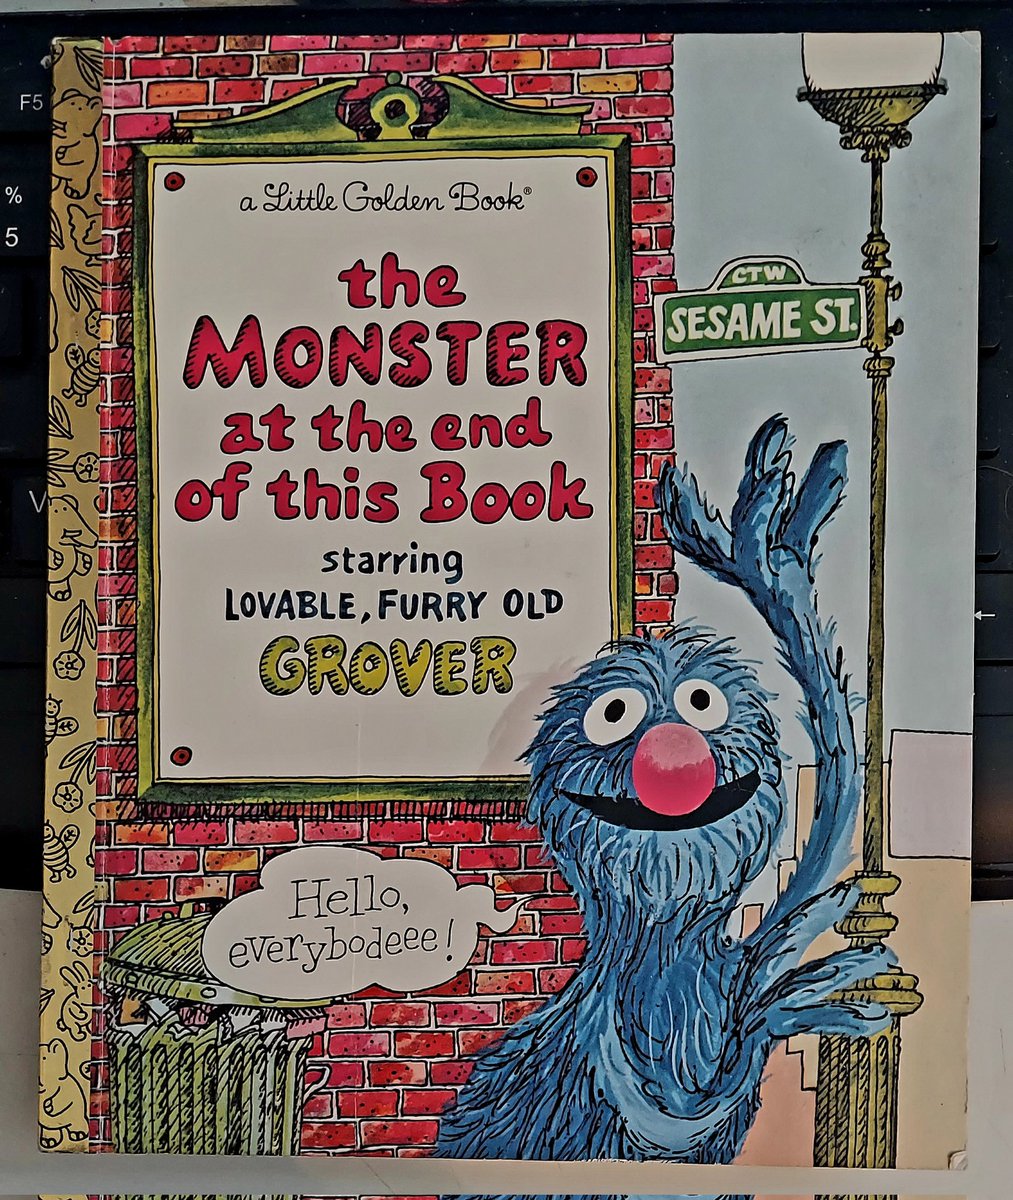 One of the classics of my youth.

#Grover #LittleGoldenBook